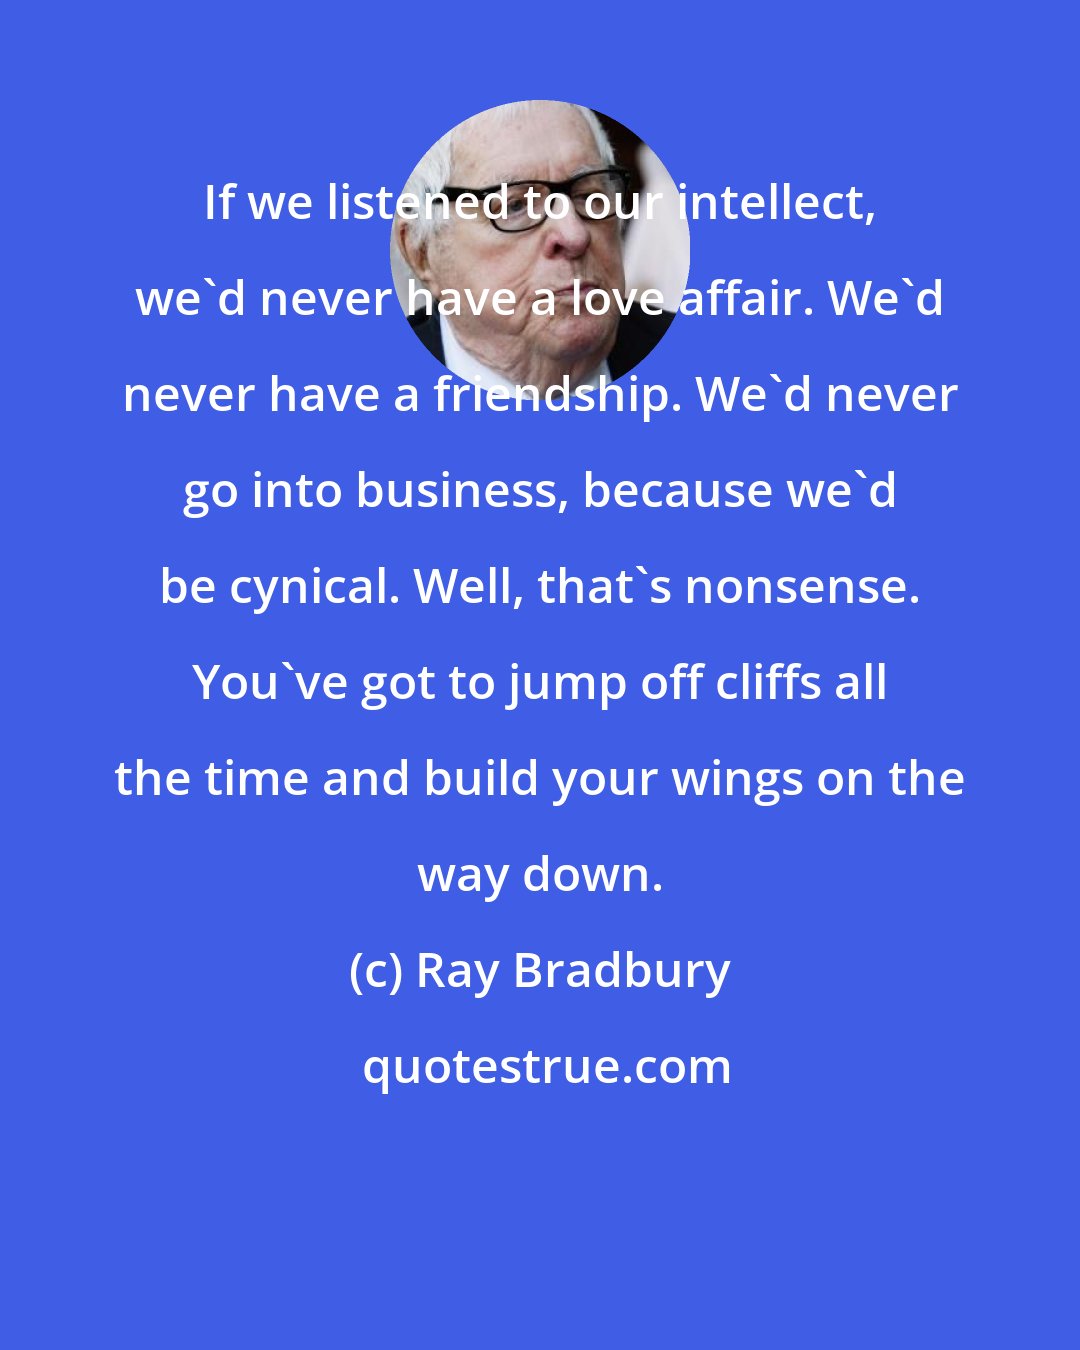 Ray Bradbury: If we listened to our intellect, we'd never have a love affair. We'd never have a friendship. We'd never go into business, because we'd be cynical. Well, that's nonsense. You've got to jump off cliffs all the time and build your wings on the way down.